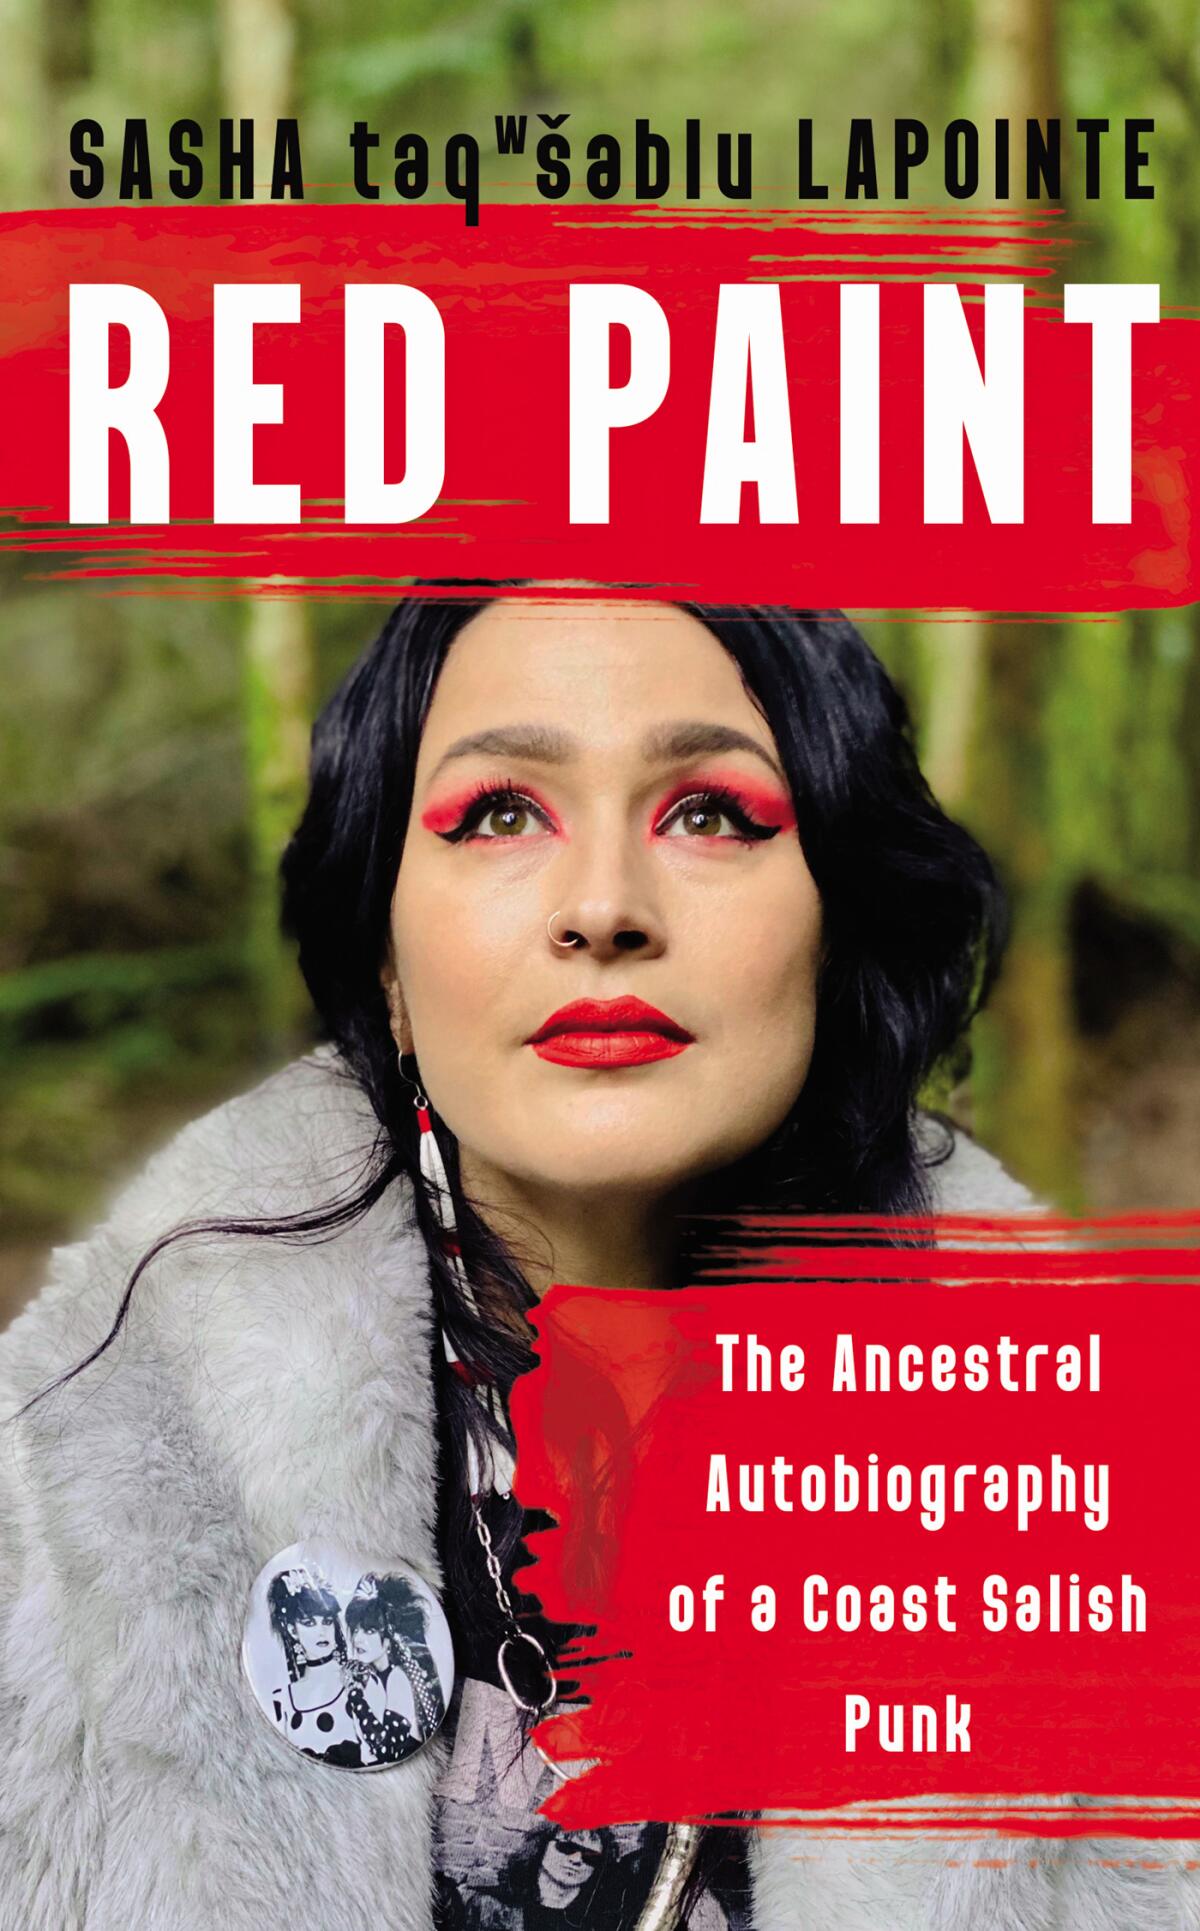 "Red Paint," by Sasha LaPointe